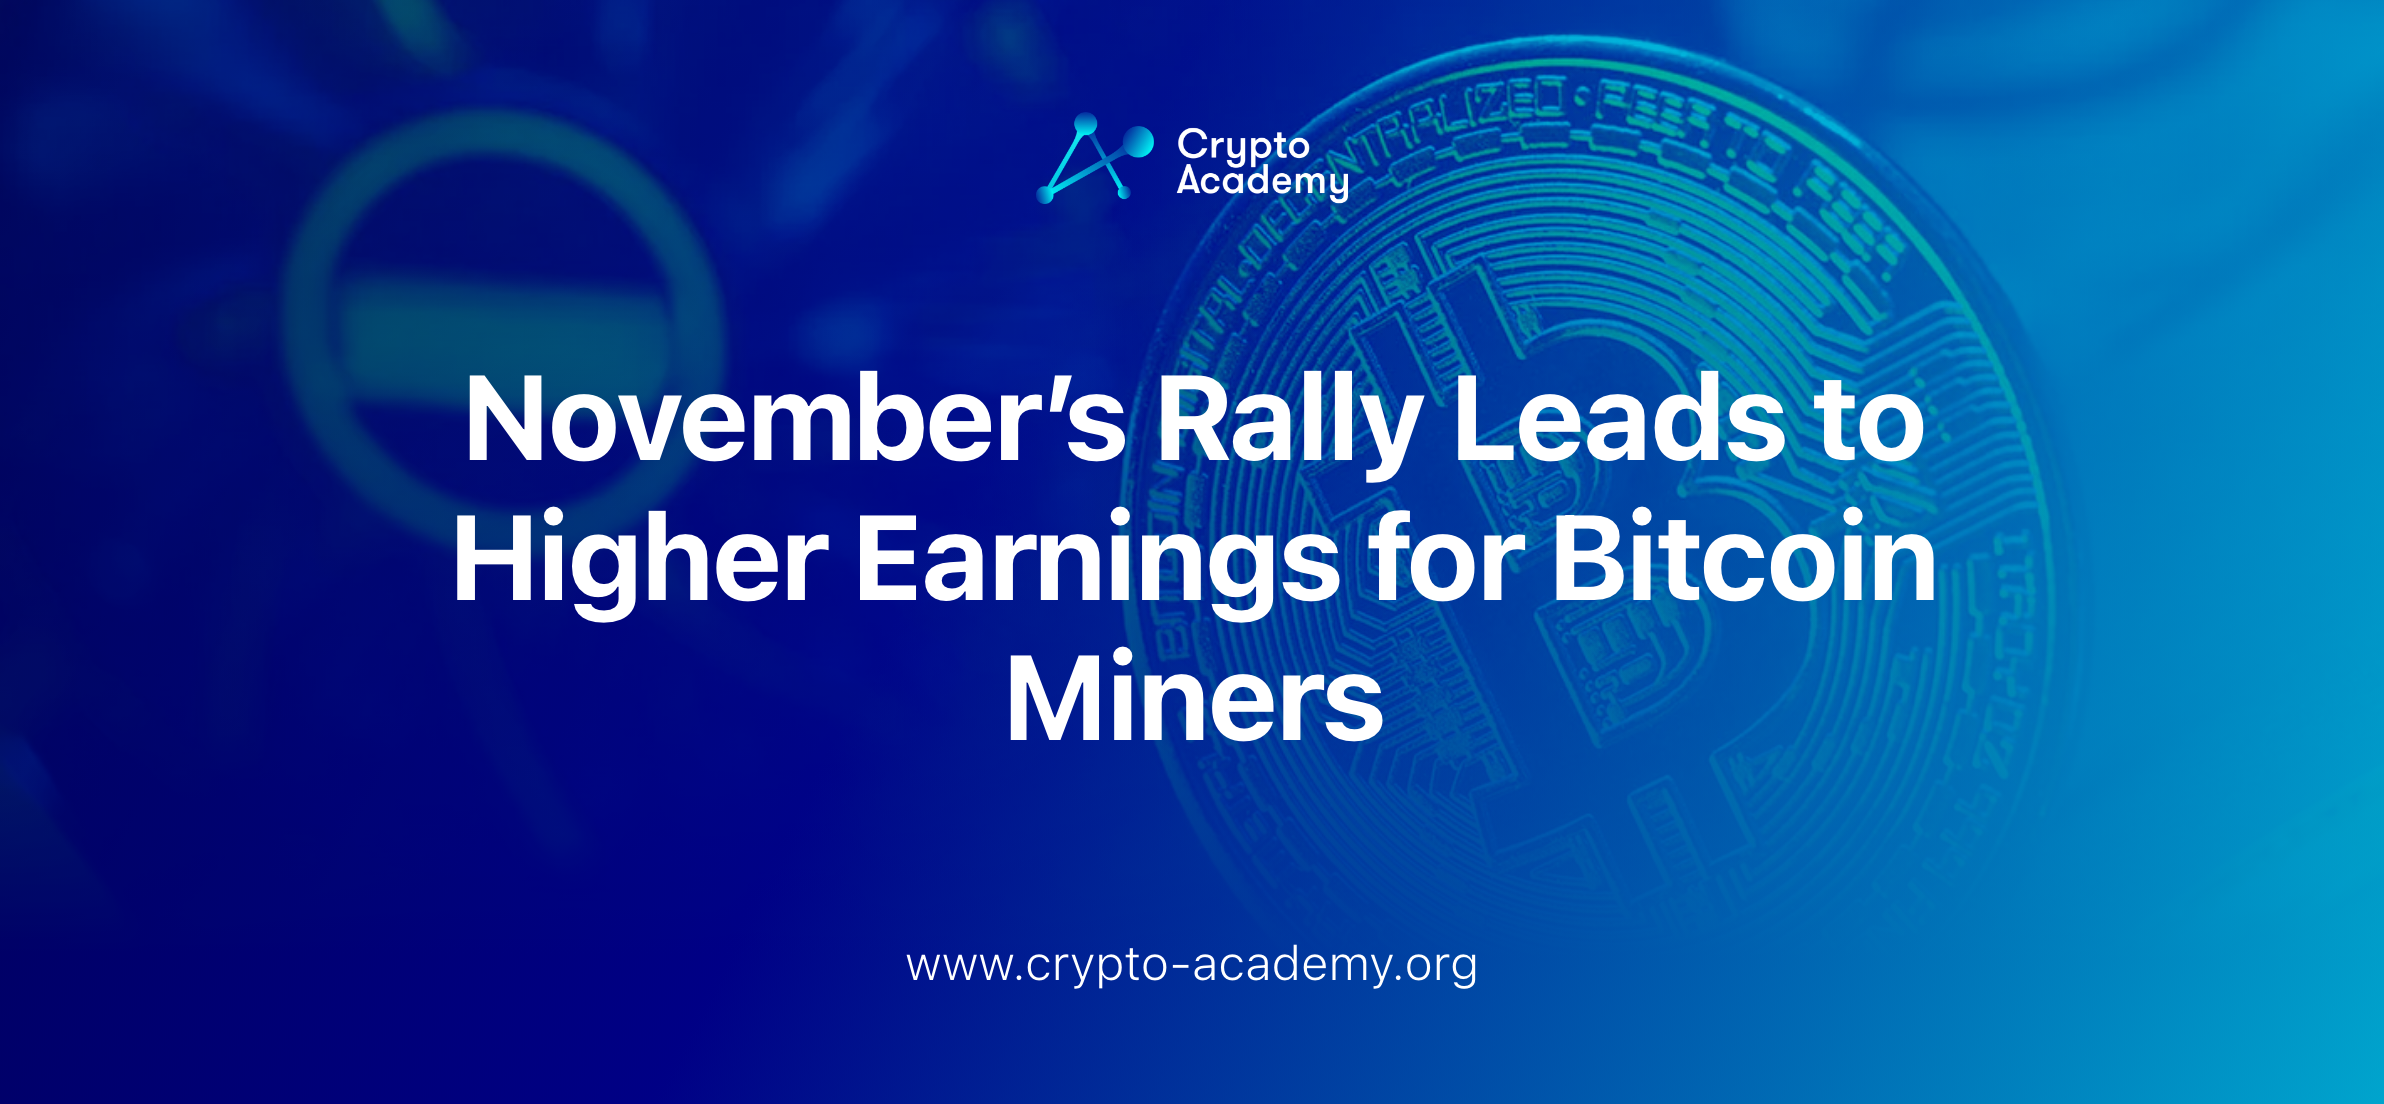 November's Rally Leads to Higher Earnings for Bitcoin Miners